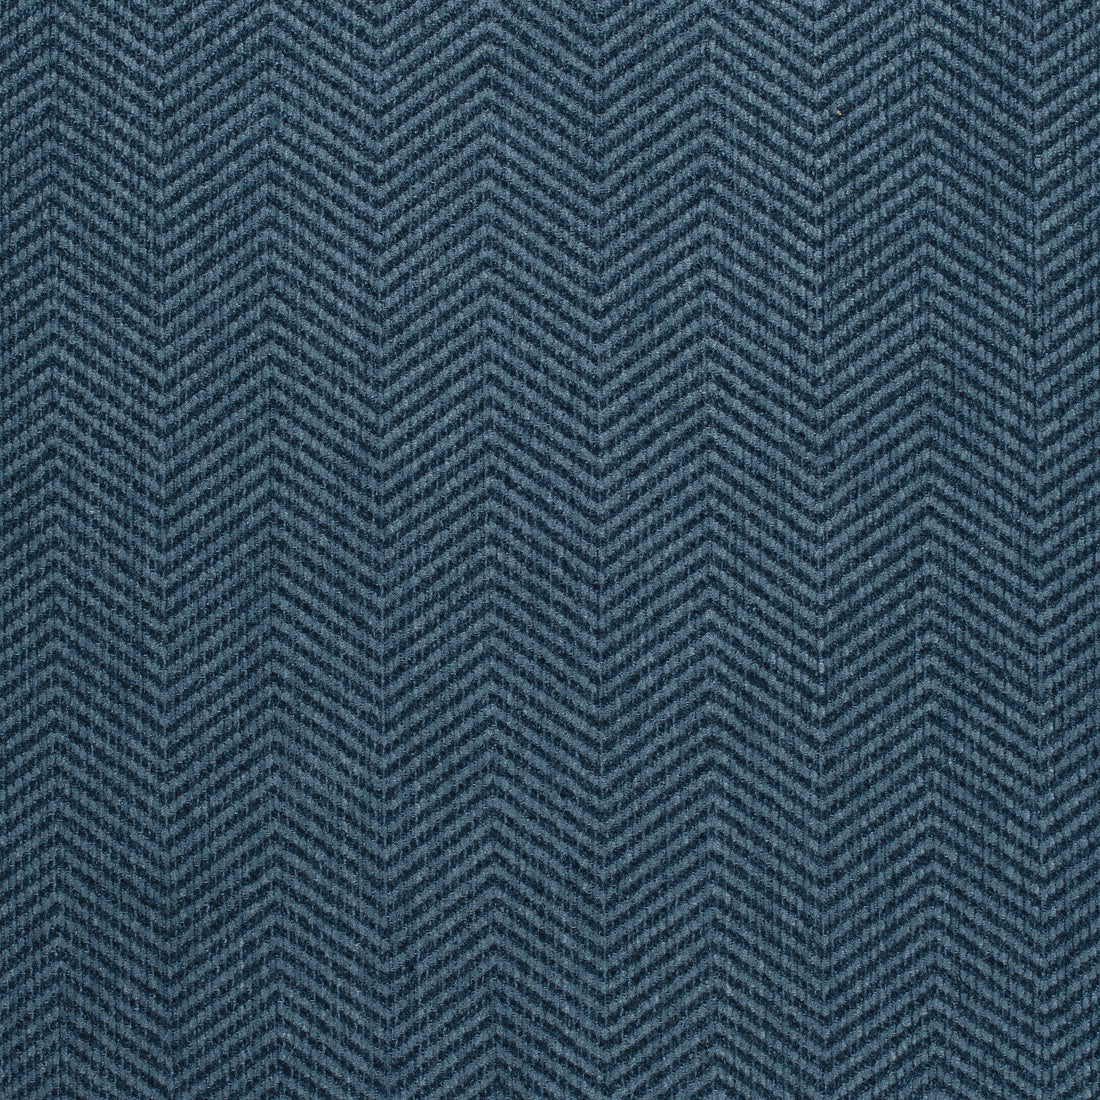 Dalton Herringbone fabric in cadet color - pattern number W80626 - by Thibaut in the Pinnacle collection